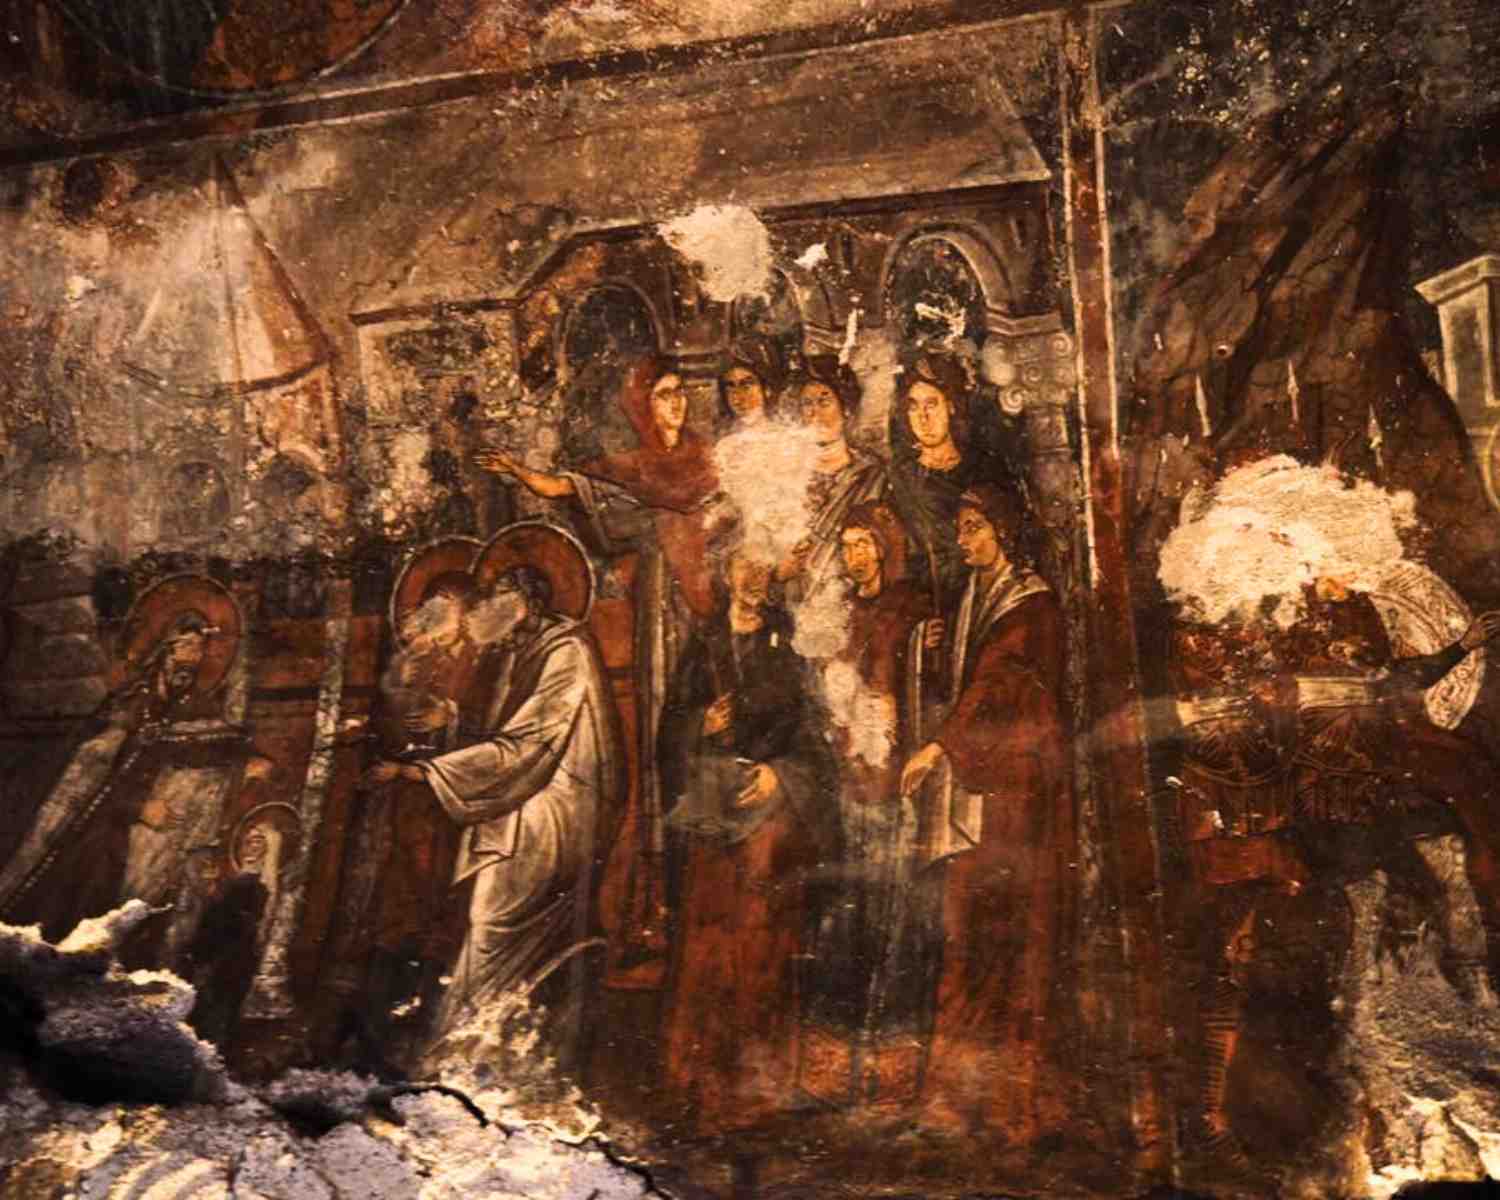 Middle Ages religious frescoes